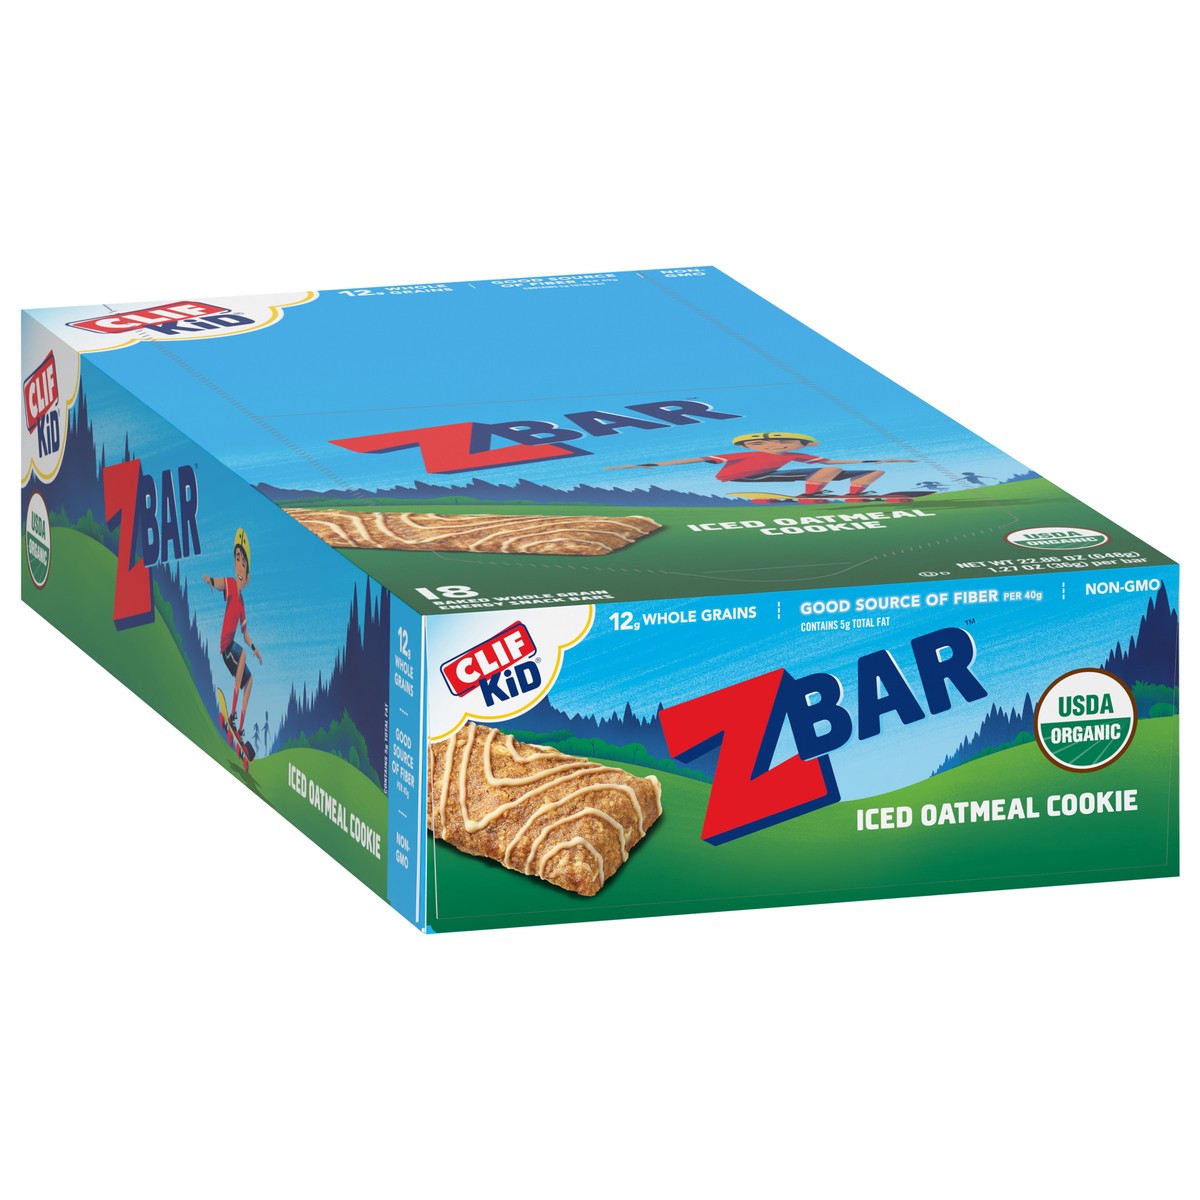 slide 10 of 12, CLIF Kid Zbar - Iced Oatmeal Cookie - Soft Baked Whole Grain Snack Bars - USDA Organic - Non-GMO - Plant-Based - 1.27 oz. (18 Count), 22.86 oz